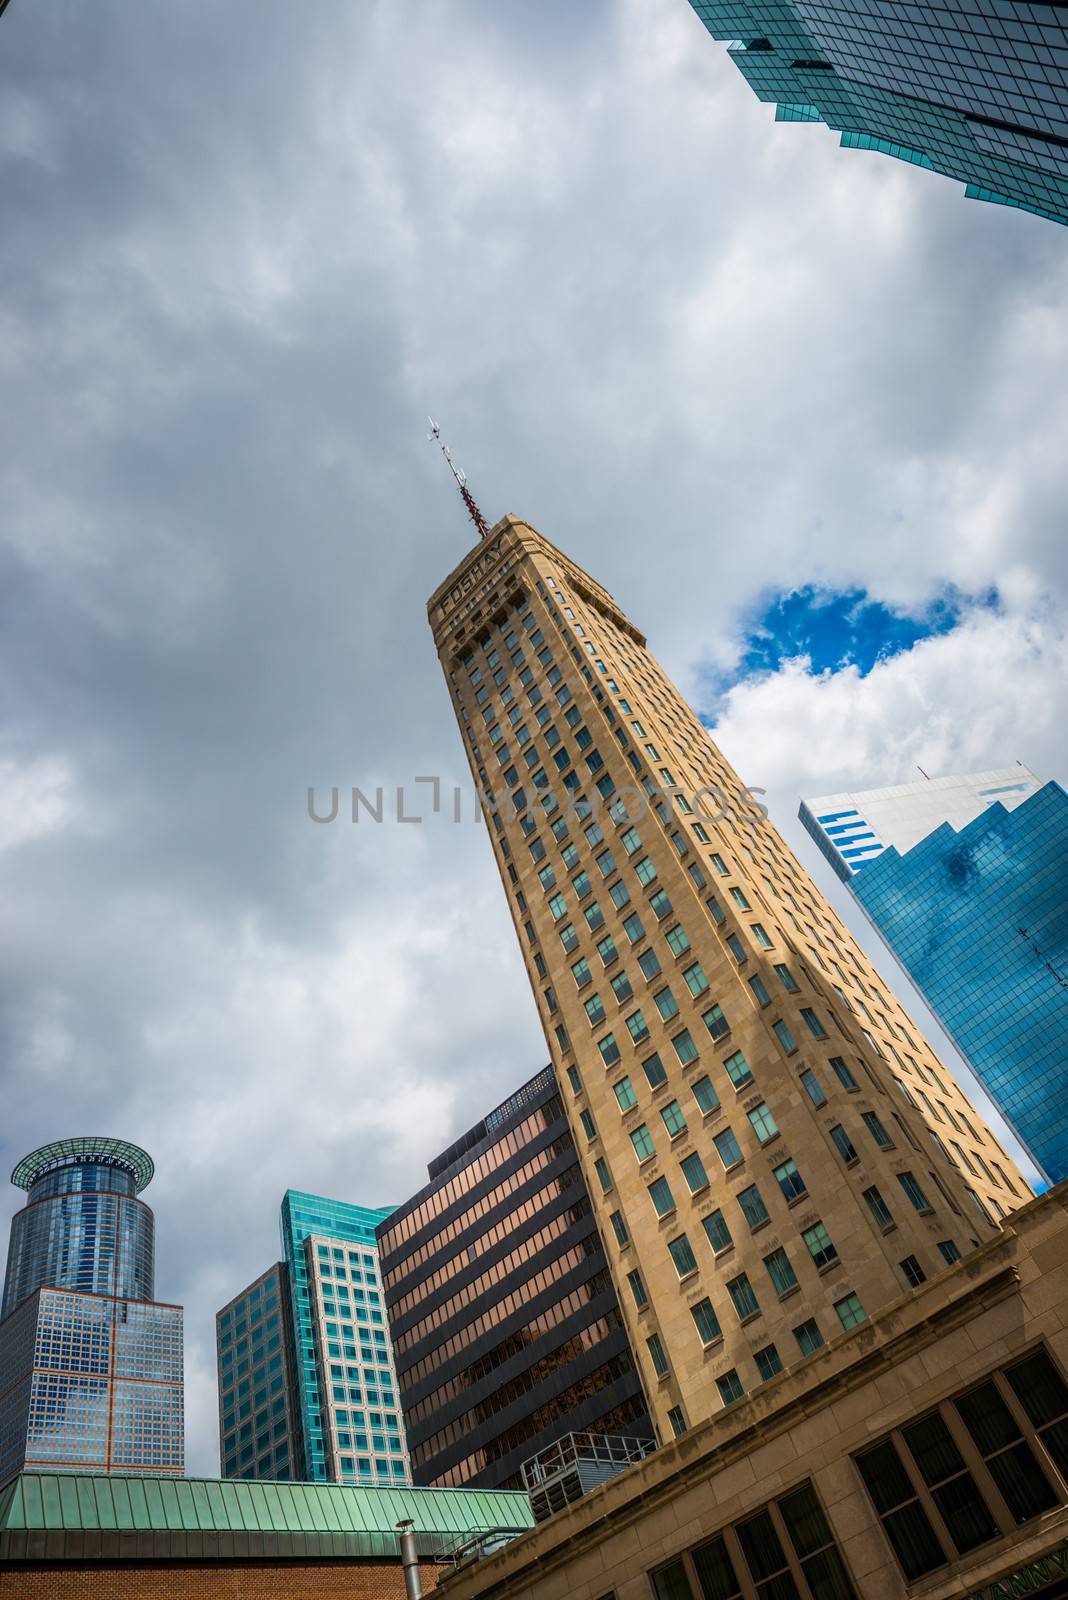 Foshay Tower of Minneapolis by IVYPHOTOS